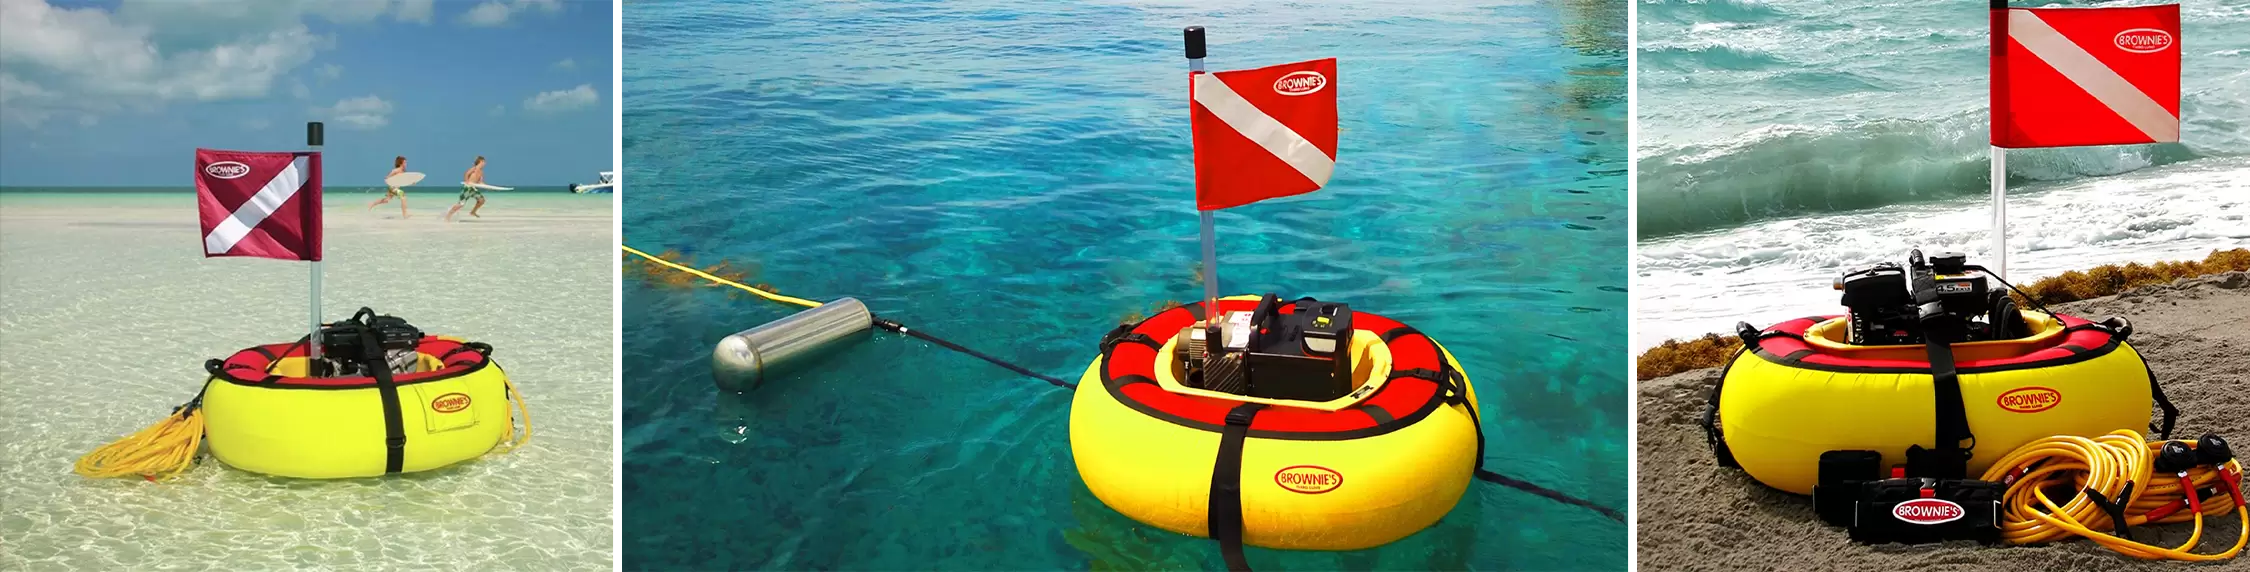 Brownie's Gas-Powered Electric Hookah Diving Systems